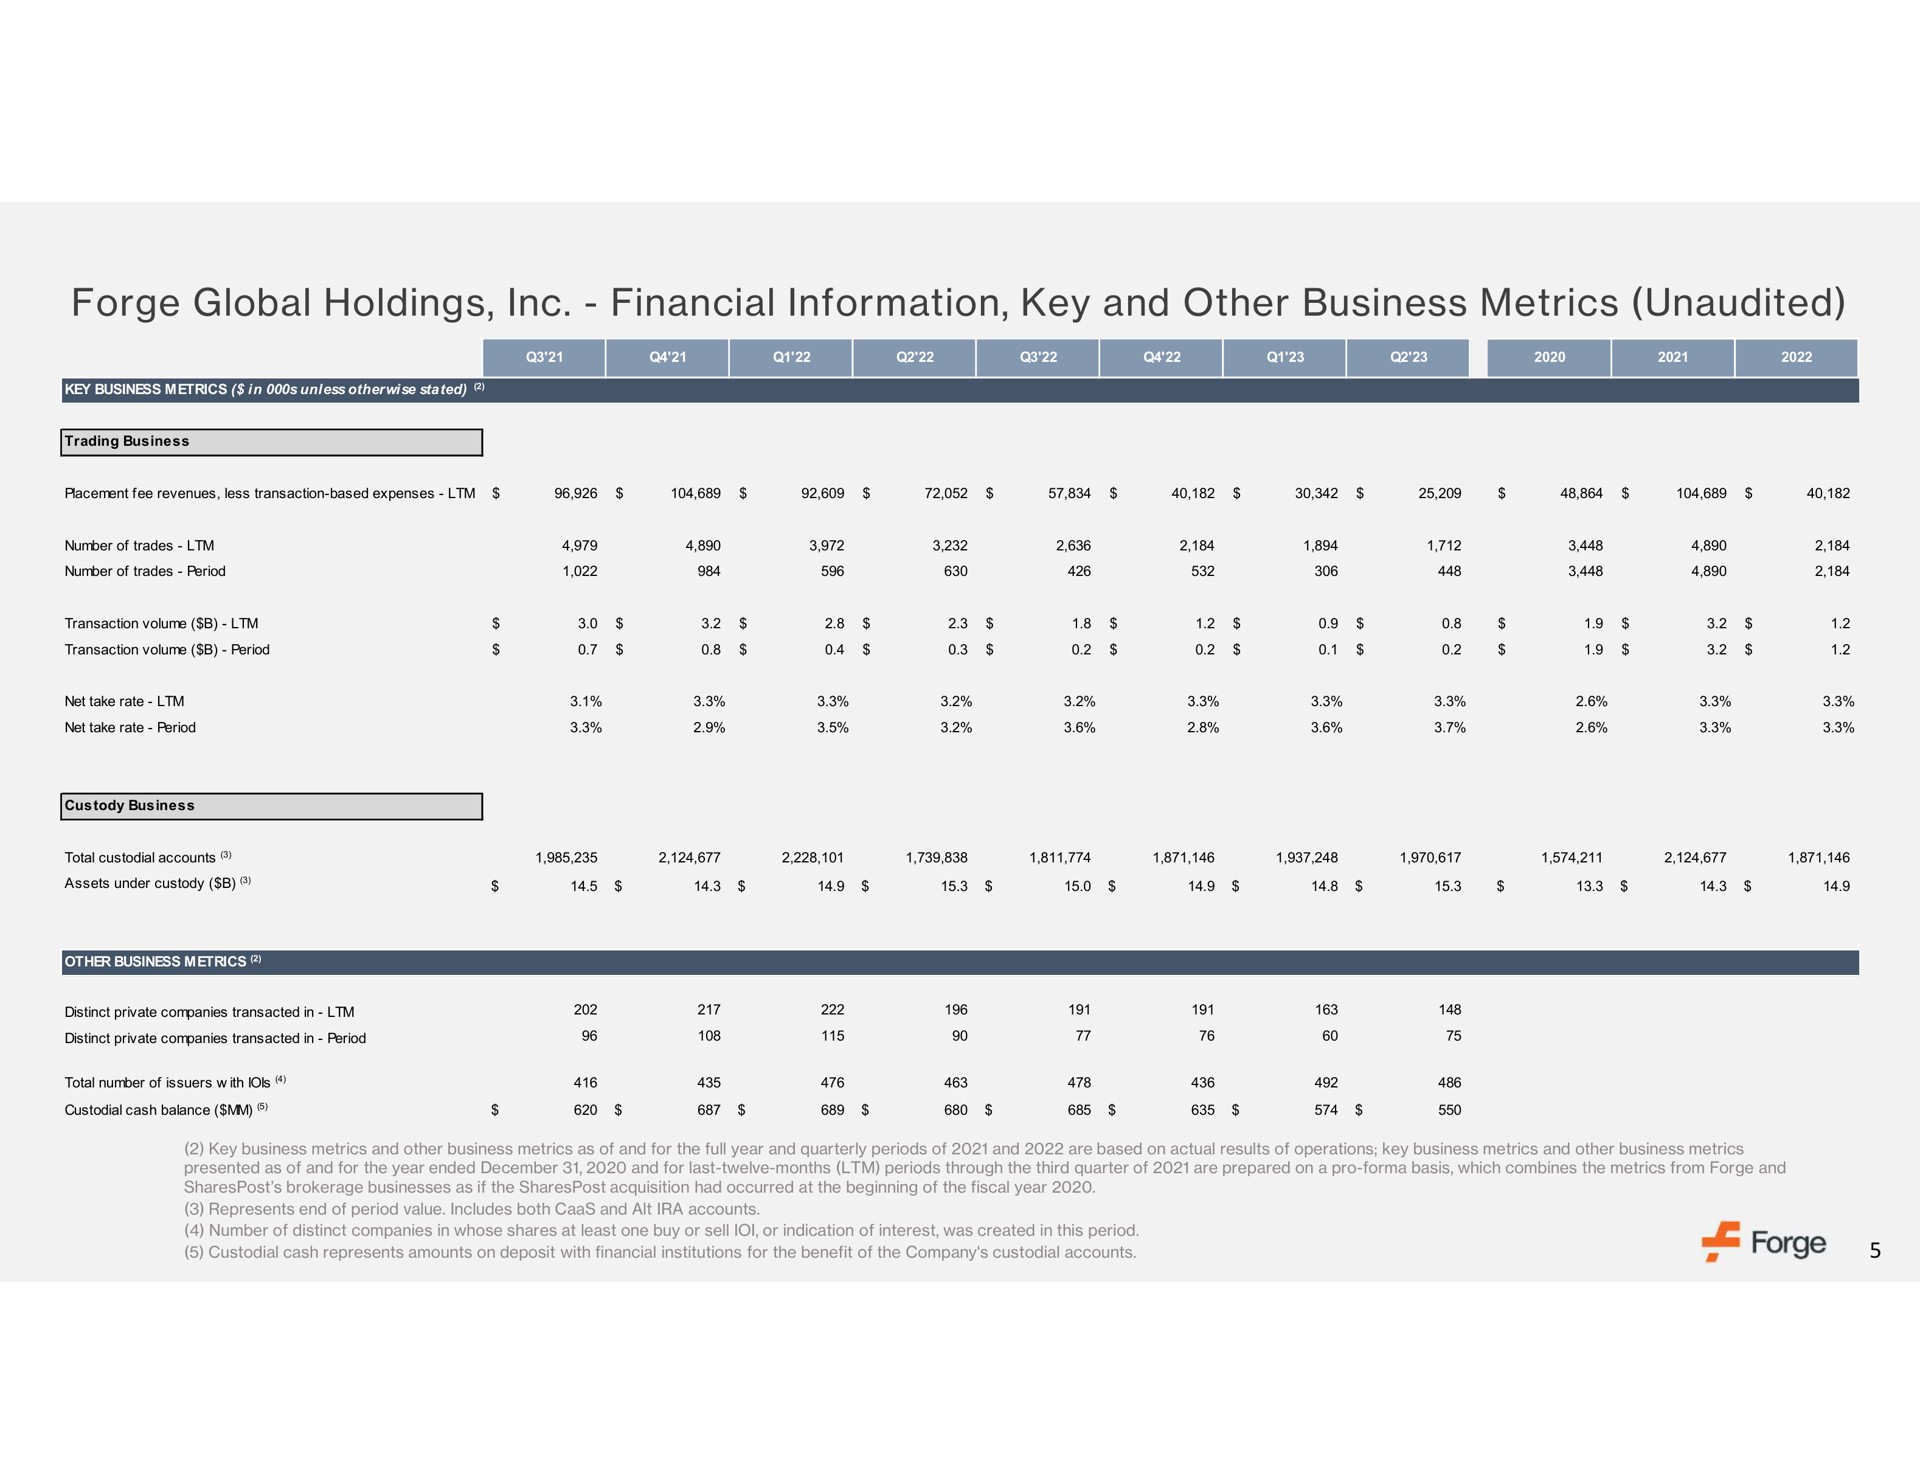 forge global holdings financial information key and other business metrics unaudited | Forge